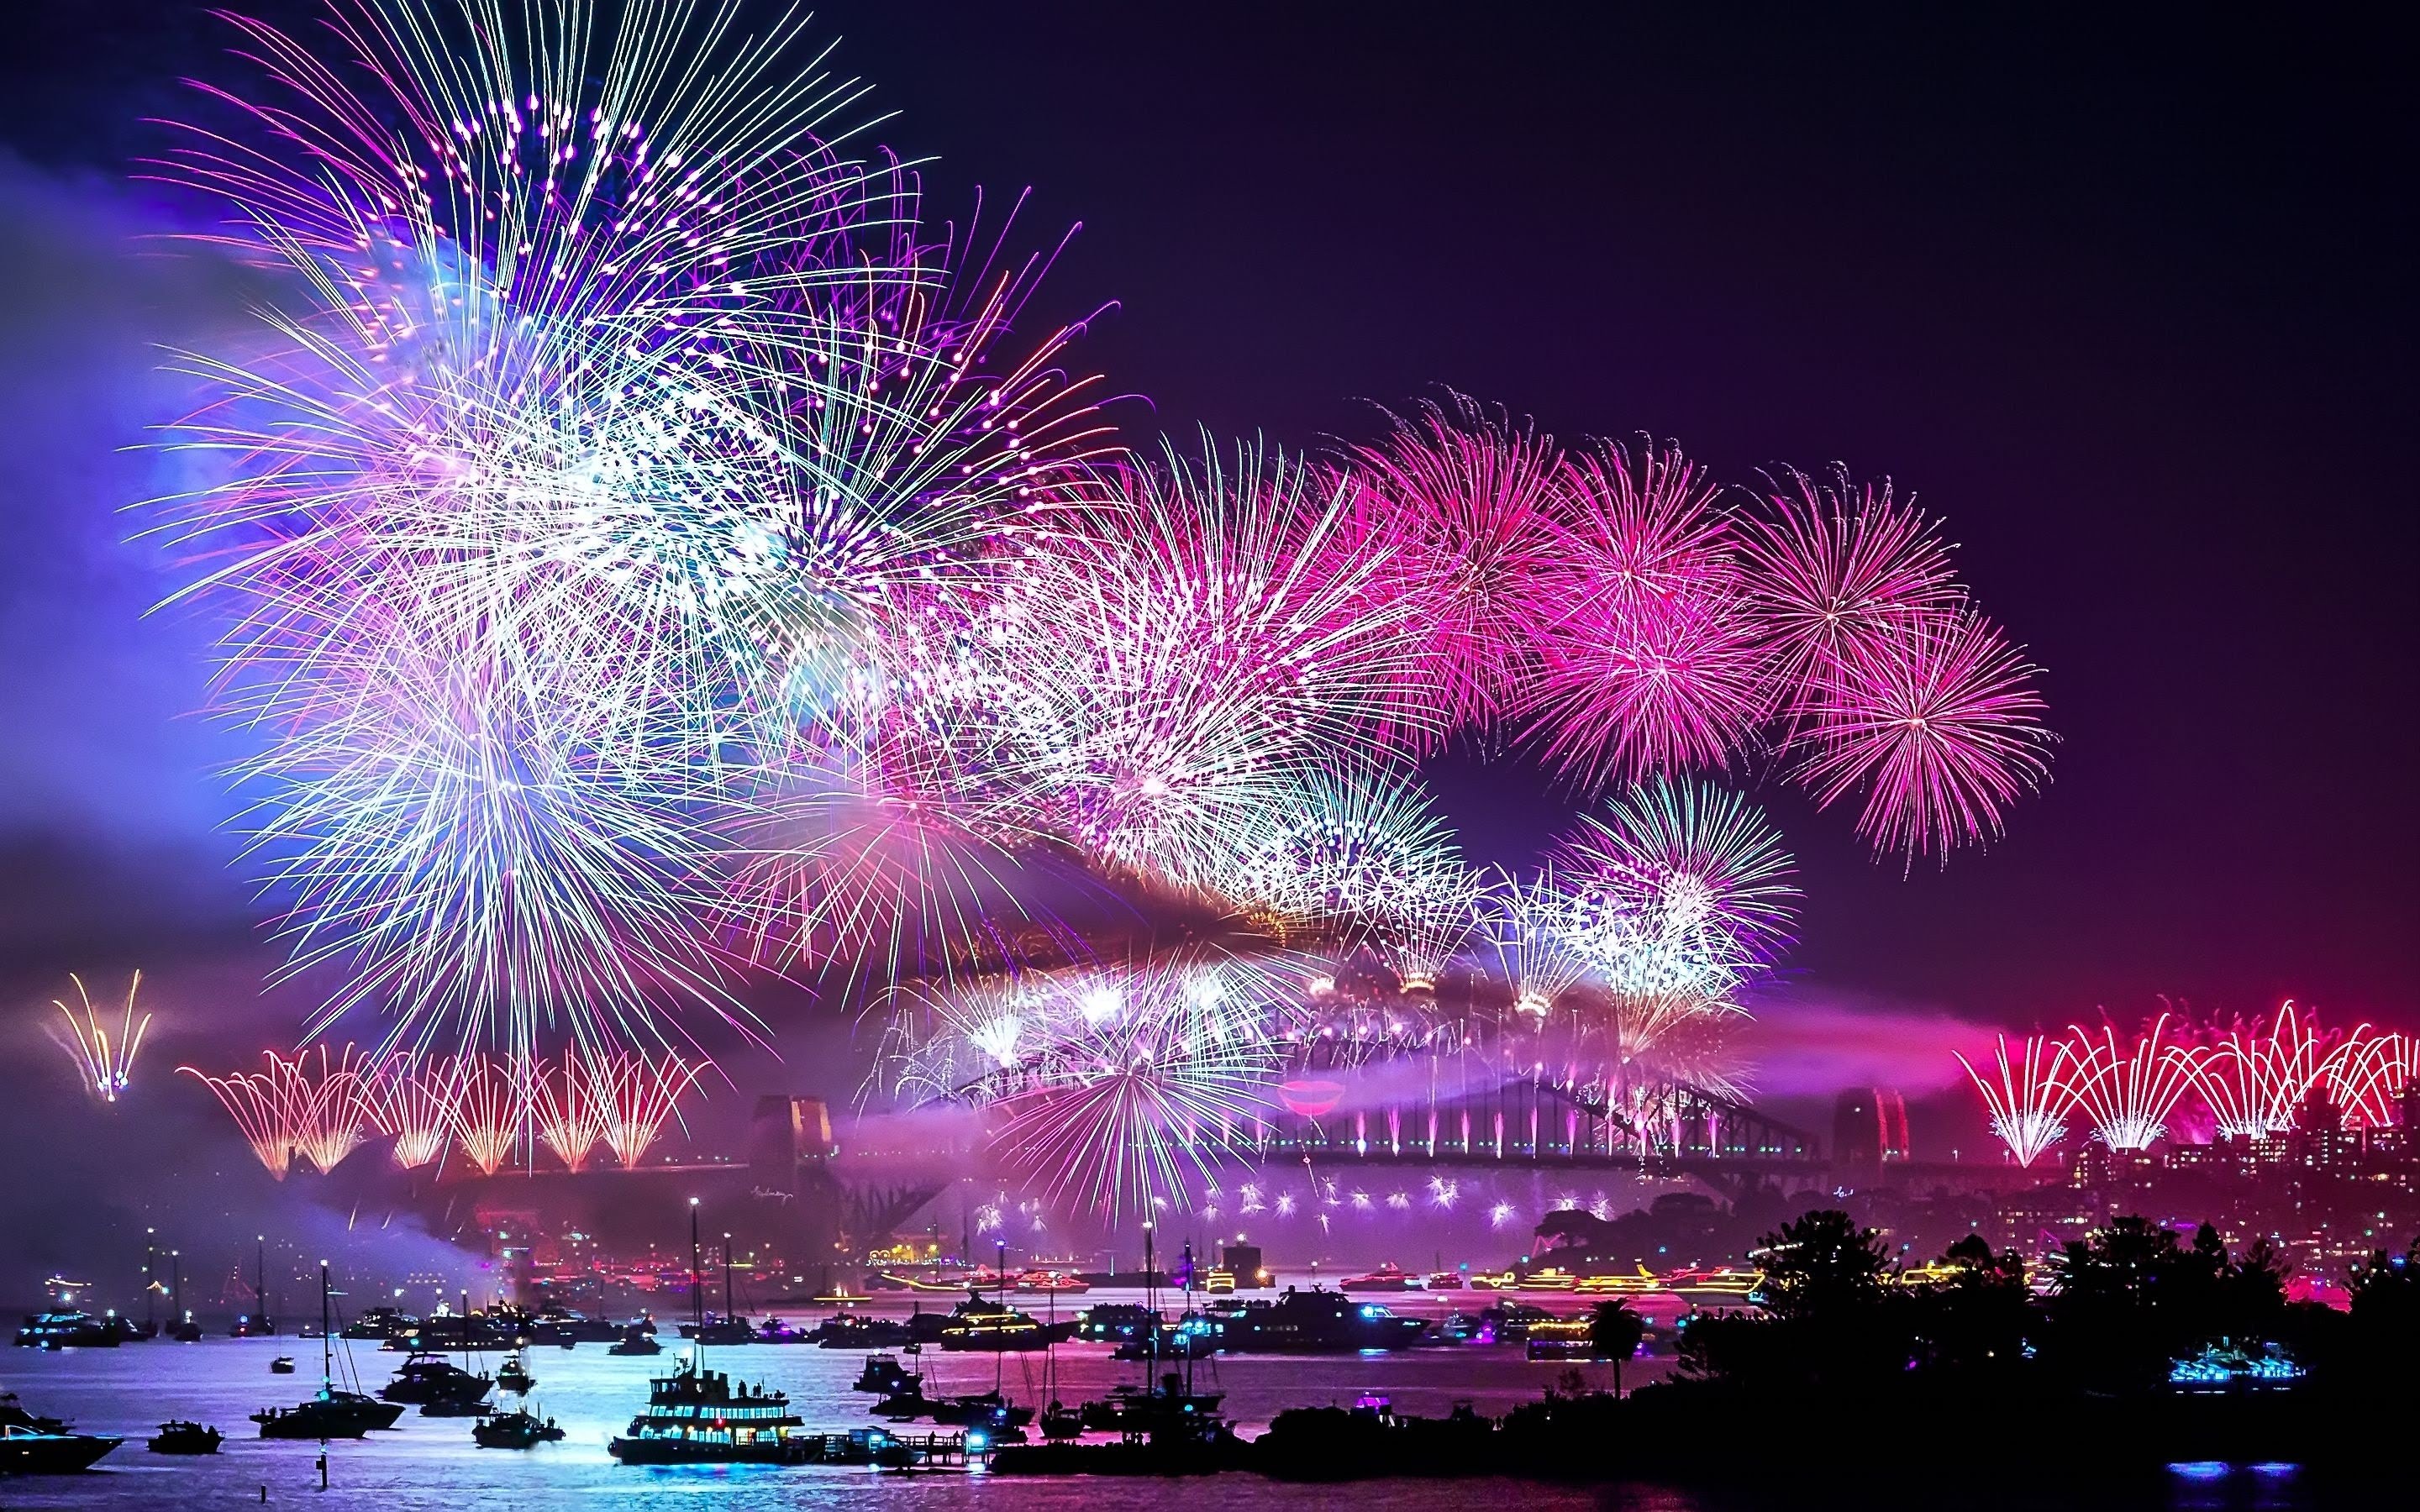 Firework Shows From Around The World - YouTube